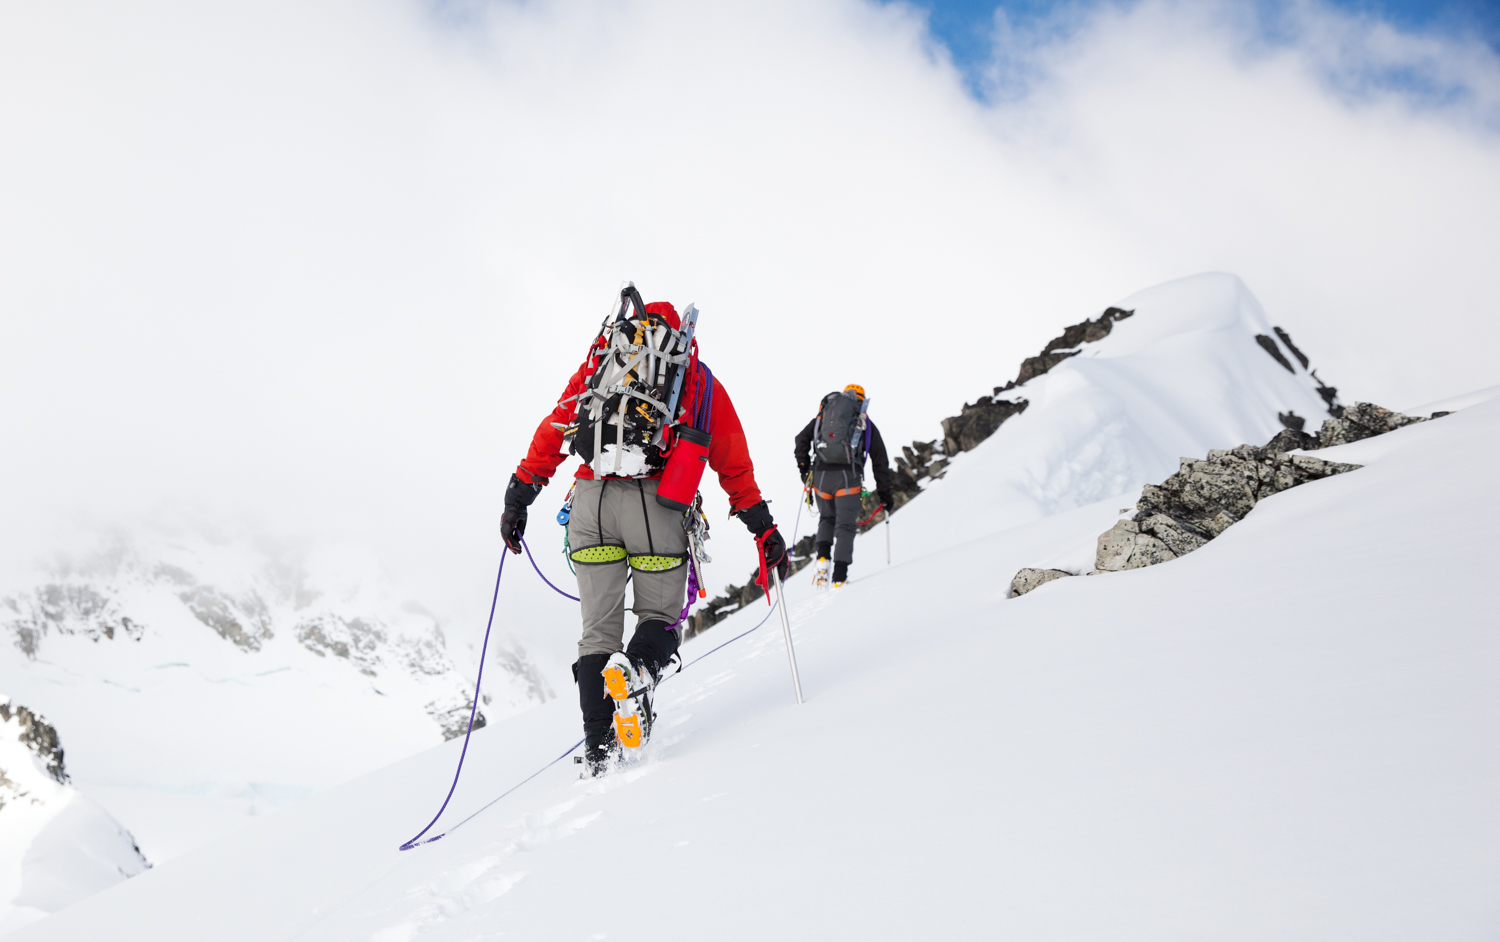  Two mountaineers ascending Wedge Mountain, Canada 